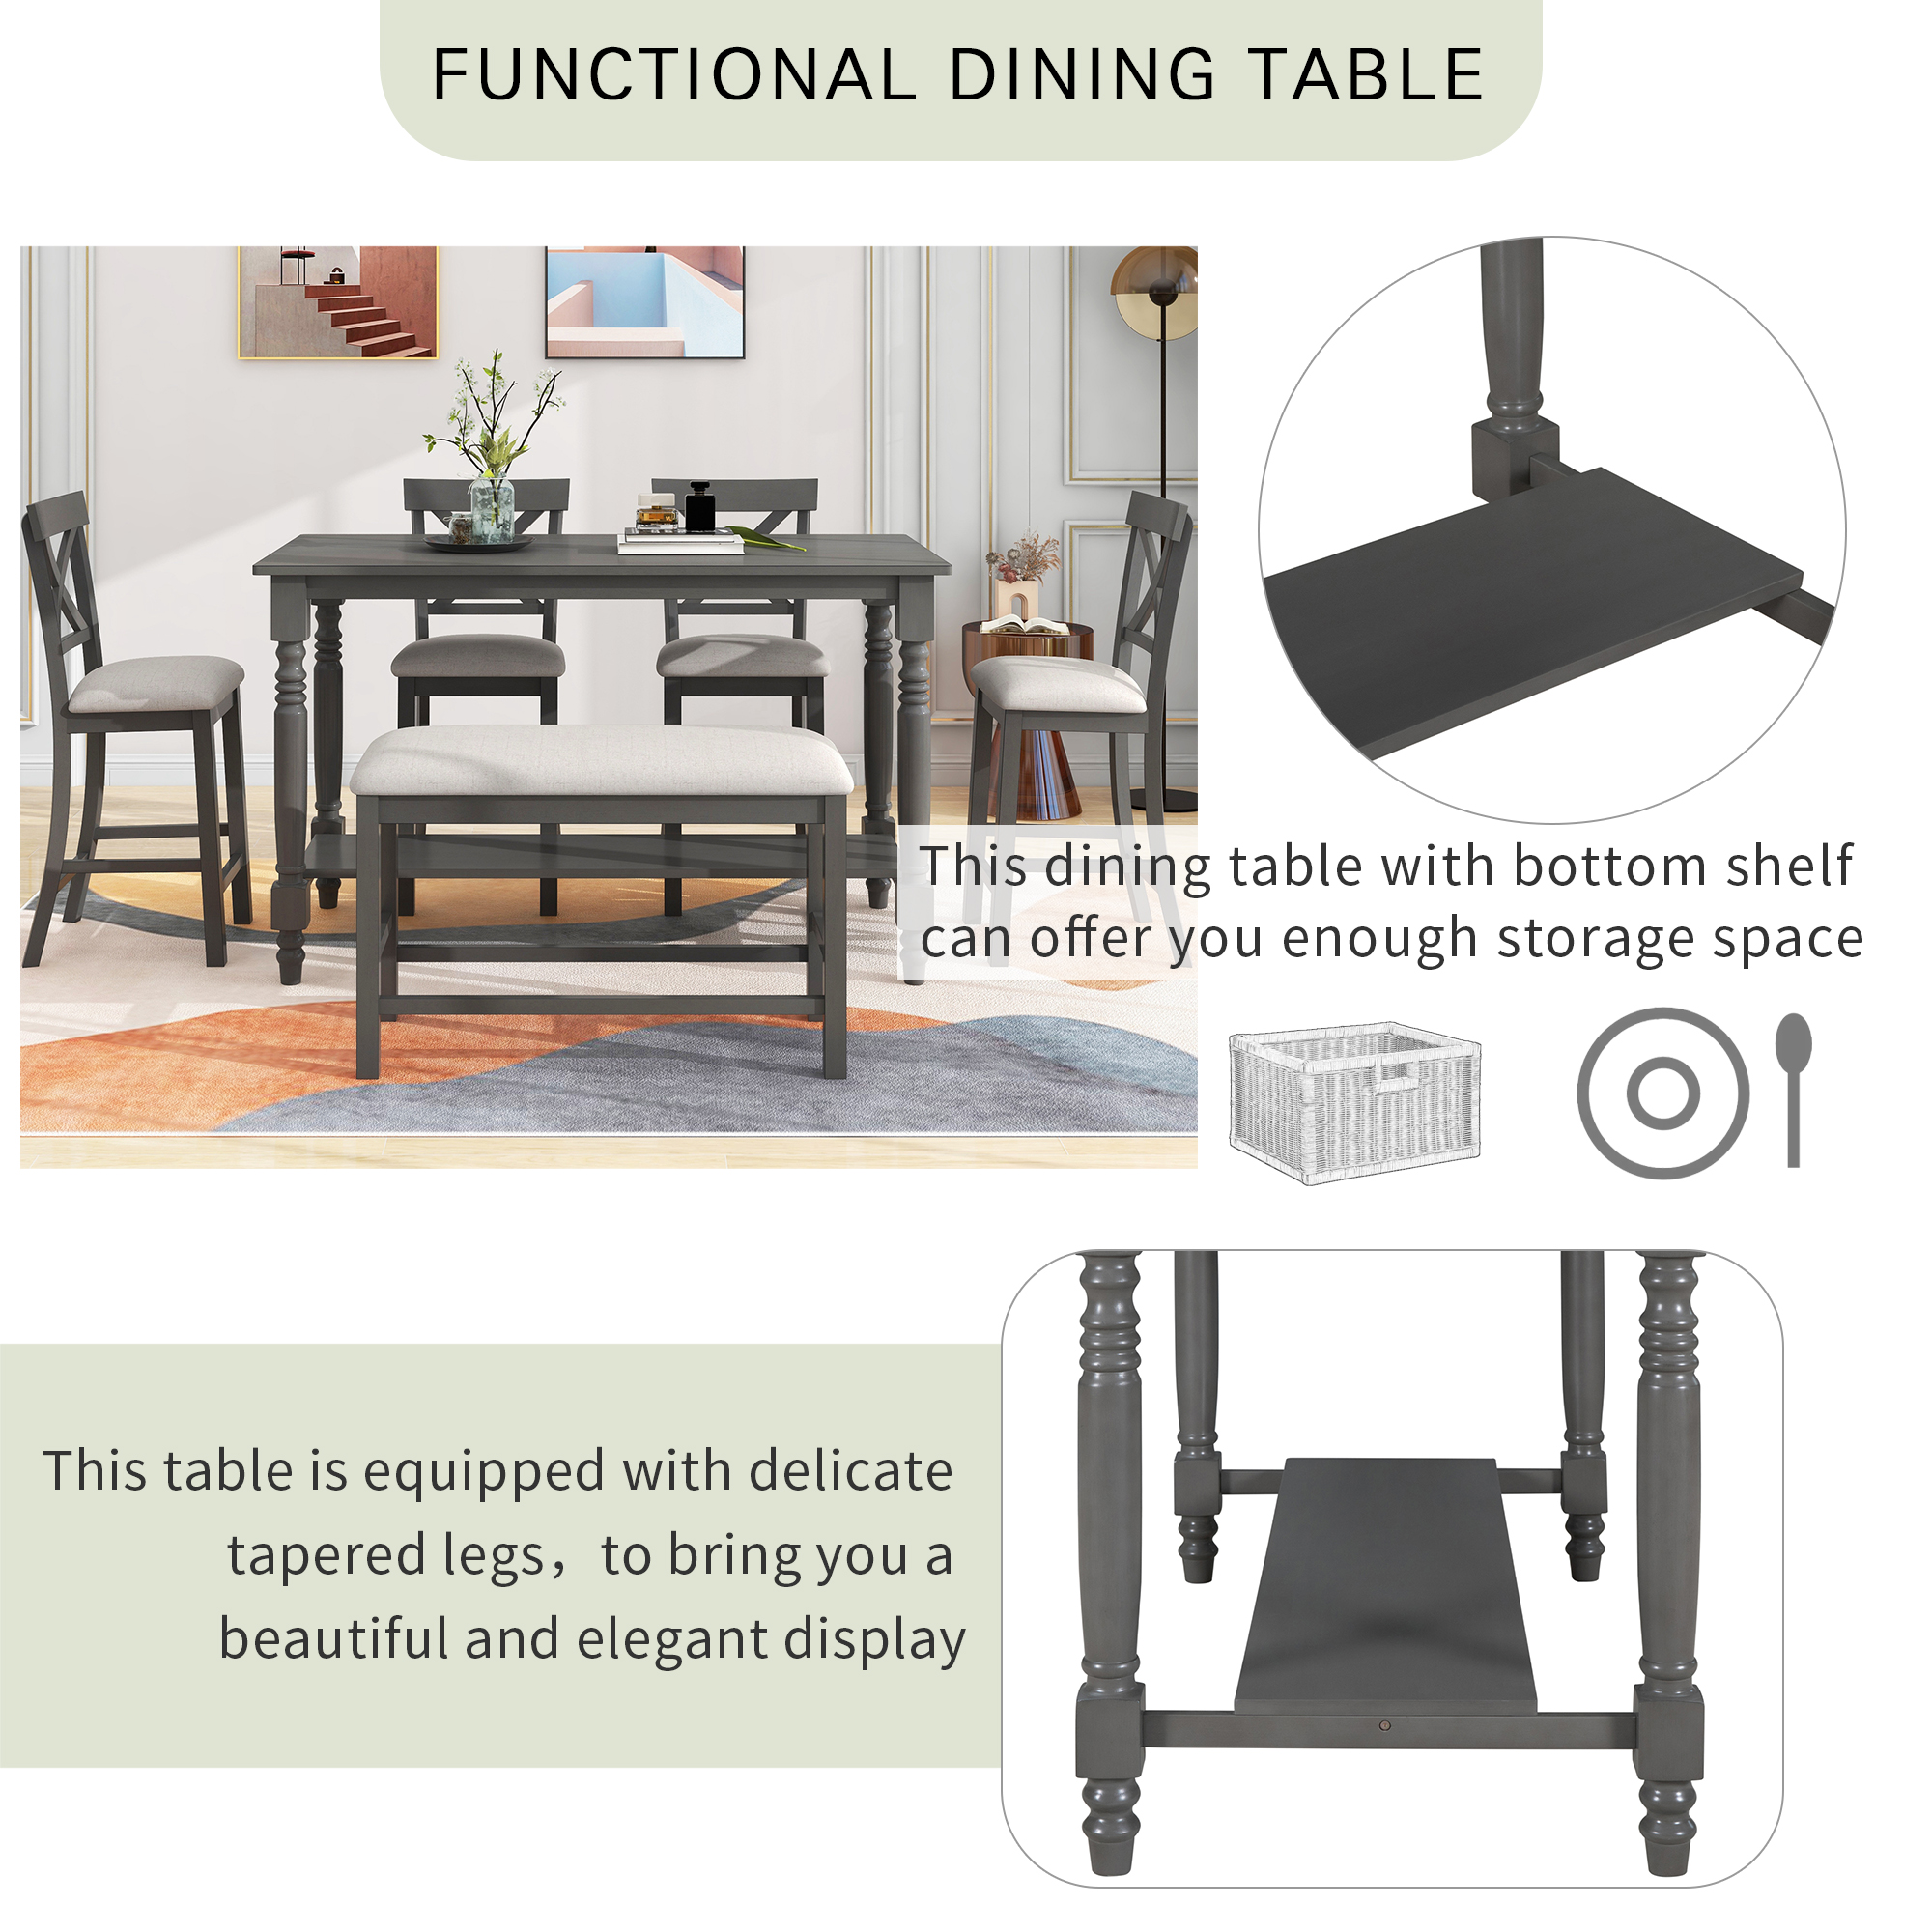 TREXM 6-Piece Counter Height Dining Table Set - ST000064AAE